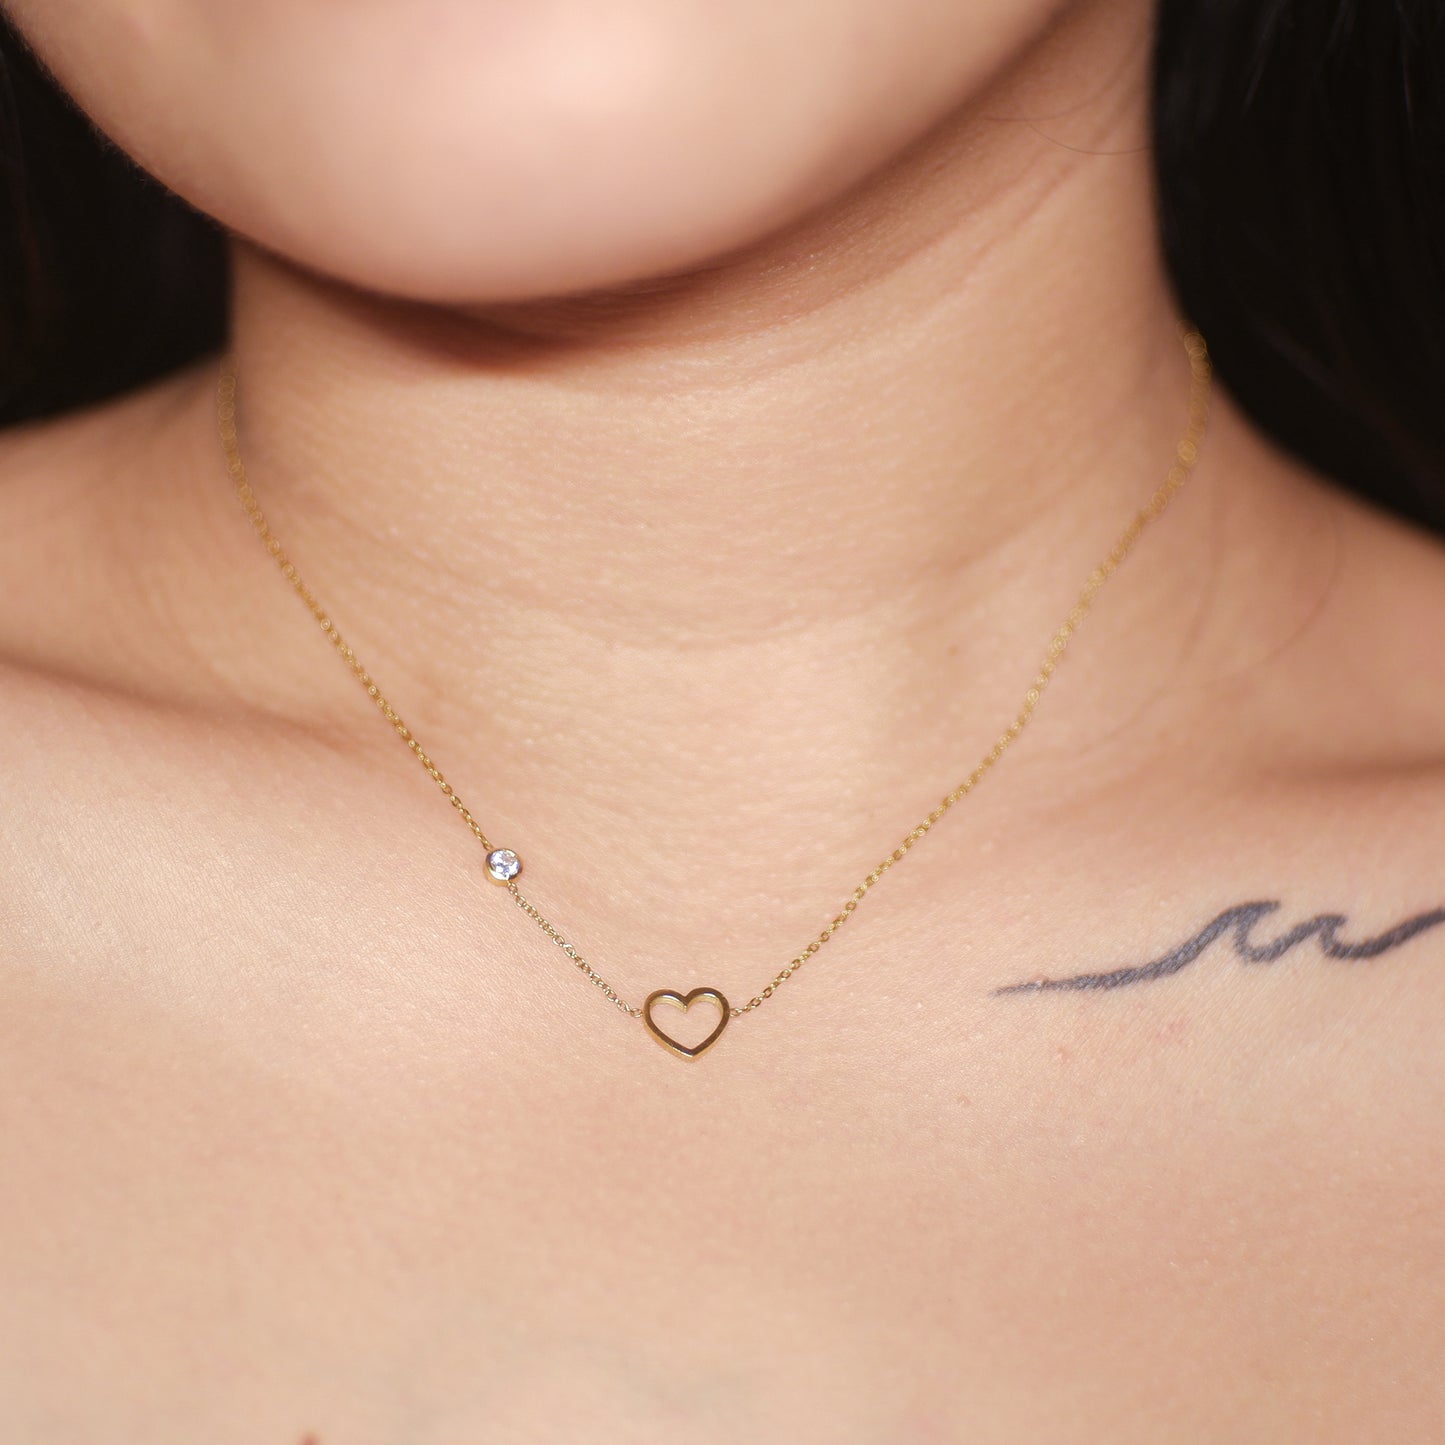 The Heart Solitaire Necklace